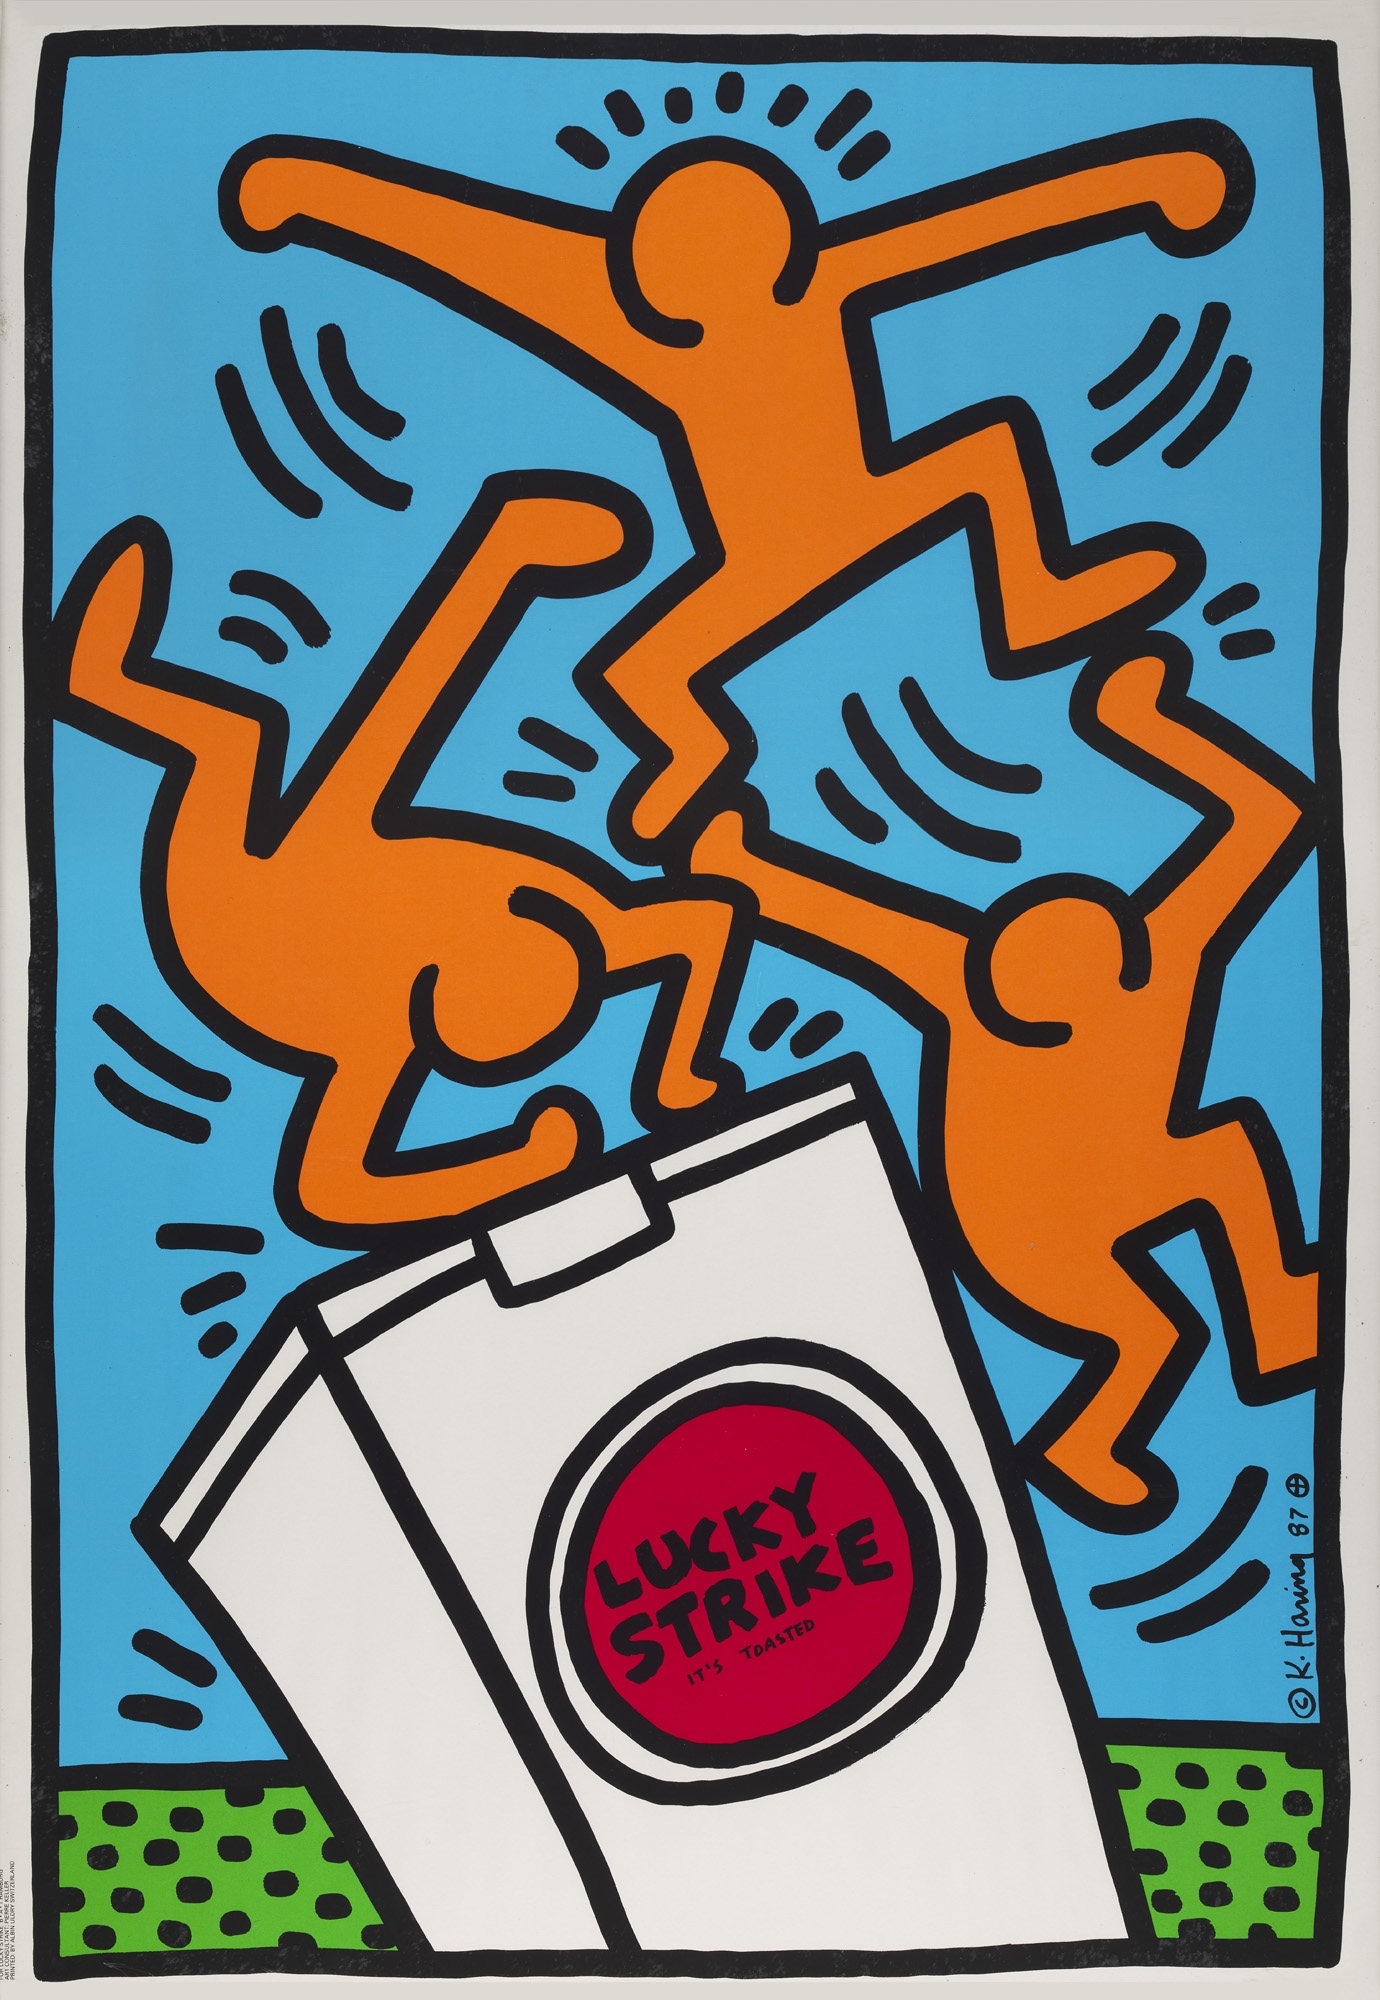 Artwork by Keith Haring, Lucky Strike. 1987, Made of color serigraph on vellum